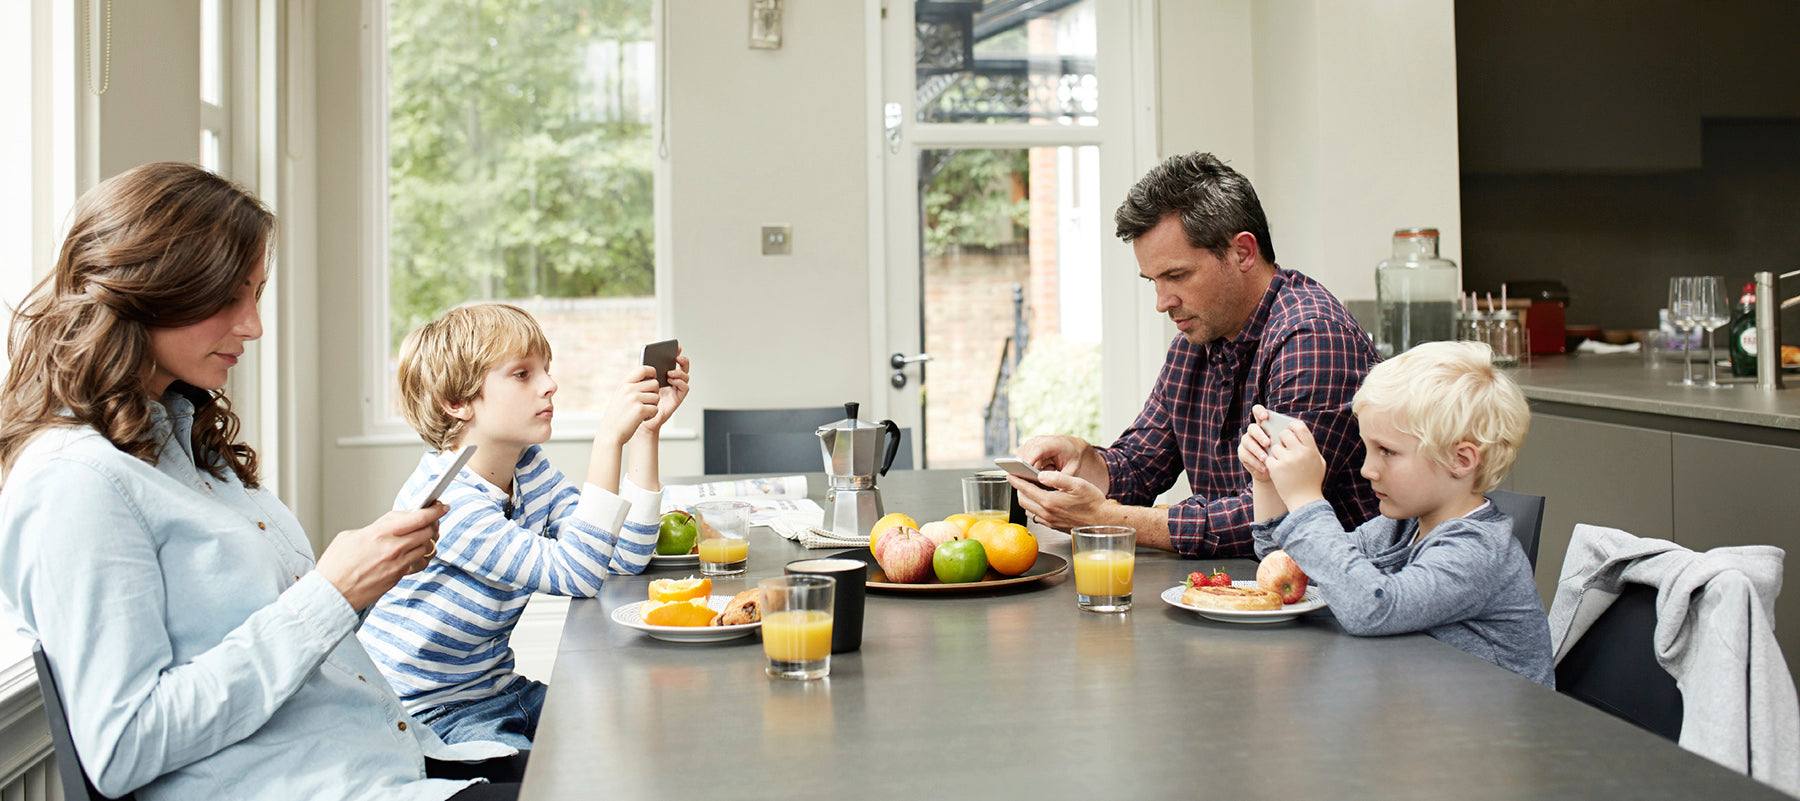 phones-at-the-dinner-table-enable-quiet-time-to spend-quality-time-with-friends-and-family